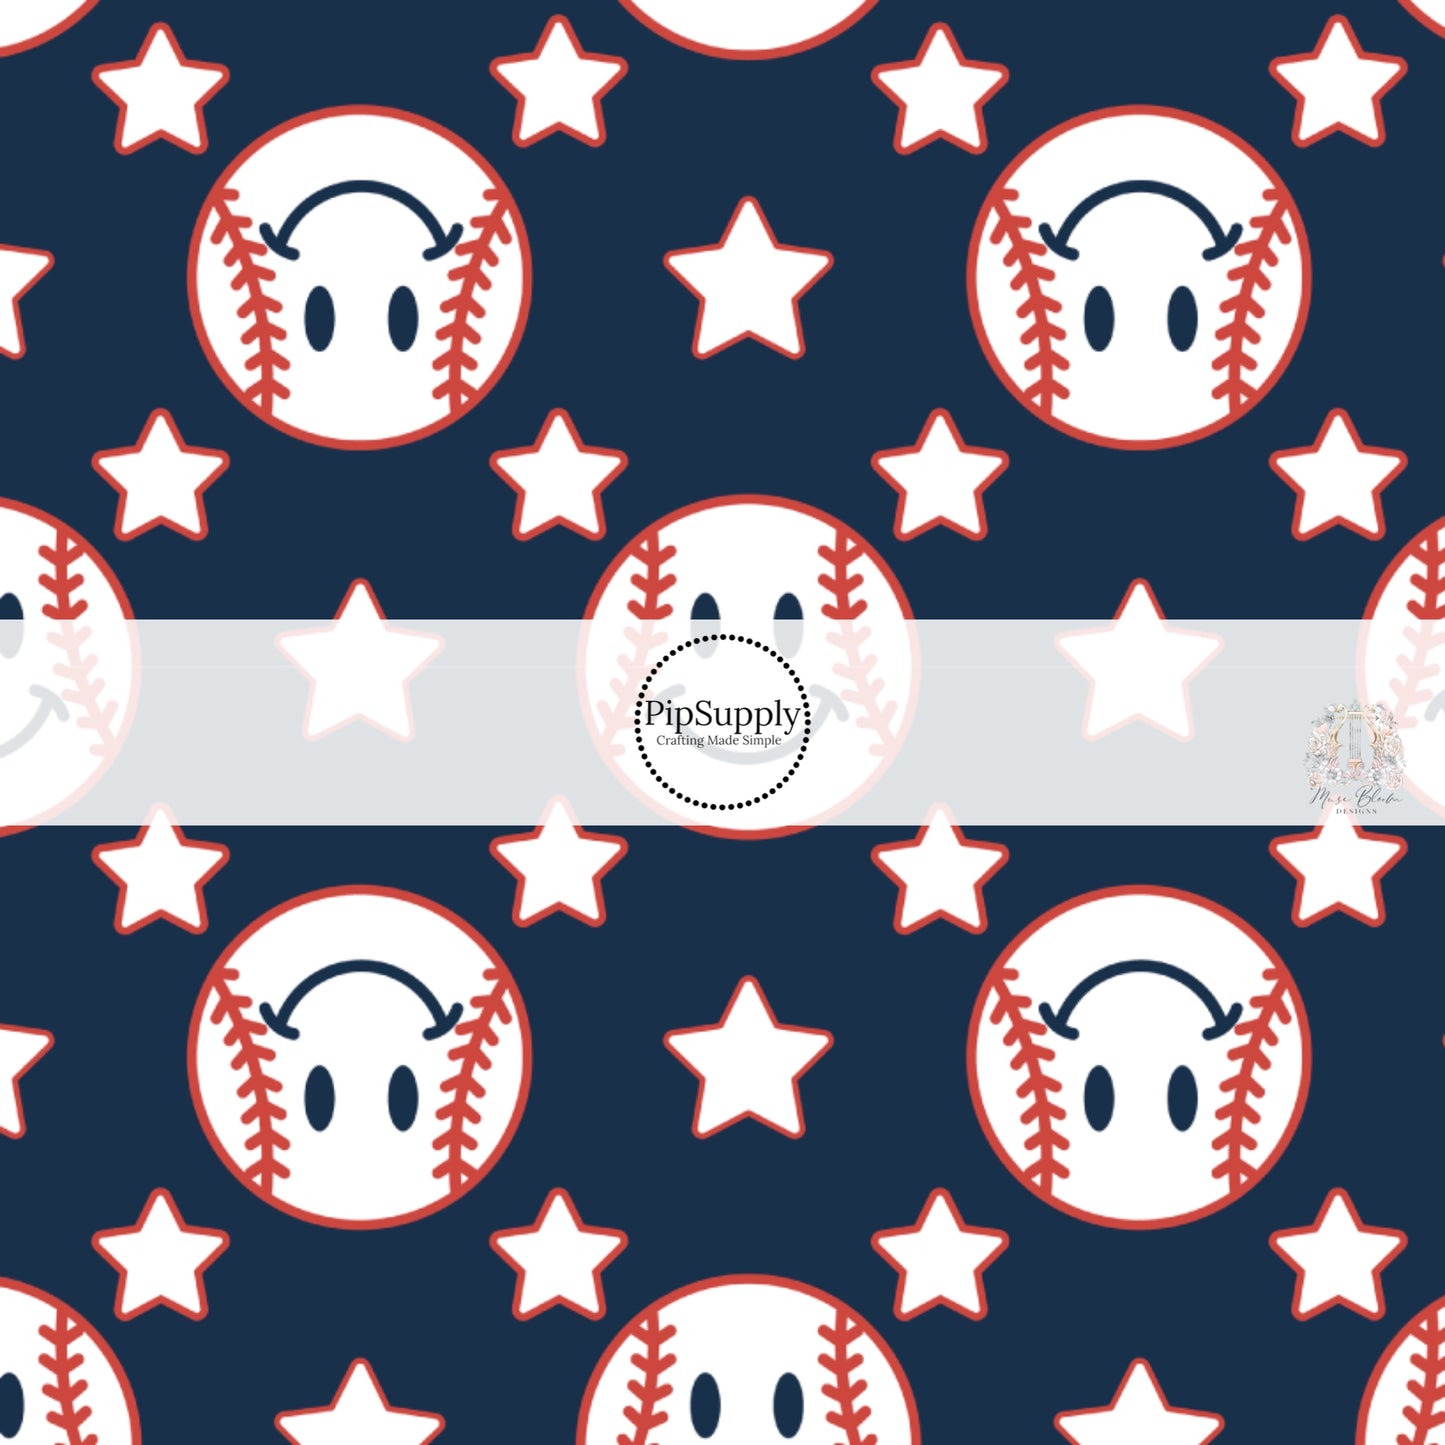 Smiley face baseballs with white stars on navy bow strips